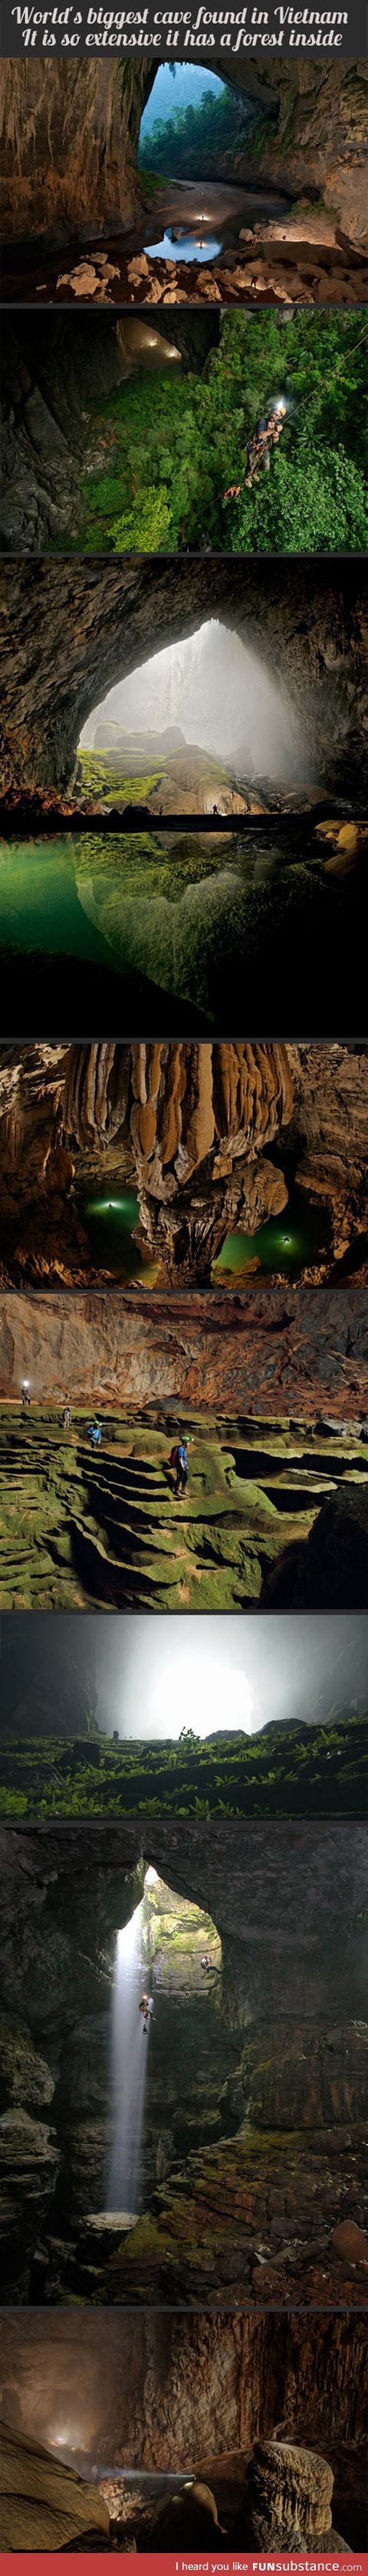 The largest cave in the world in pictures